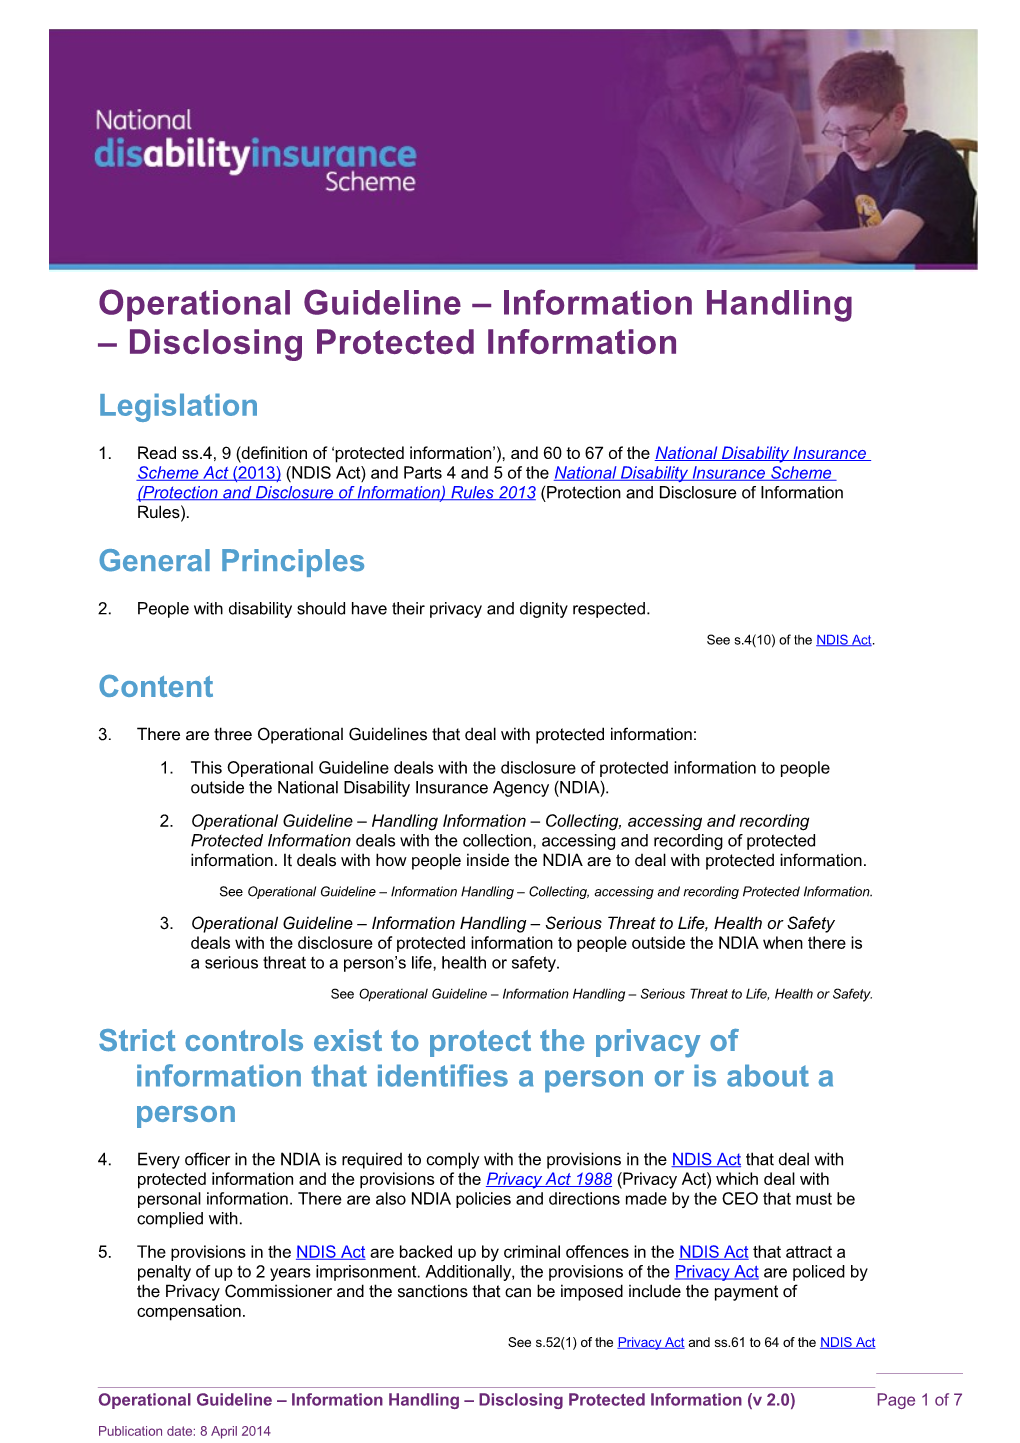 Operational Guideline Information Handling Disclosing Protected Information